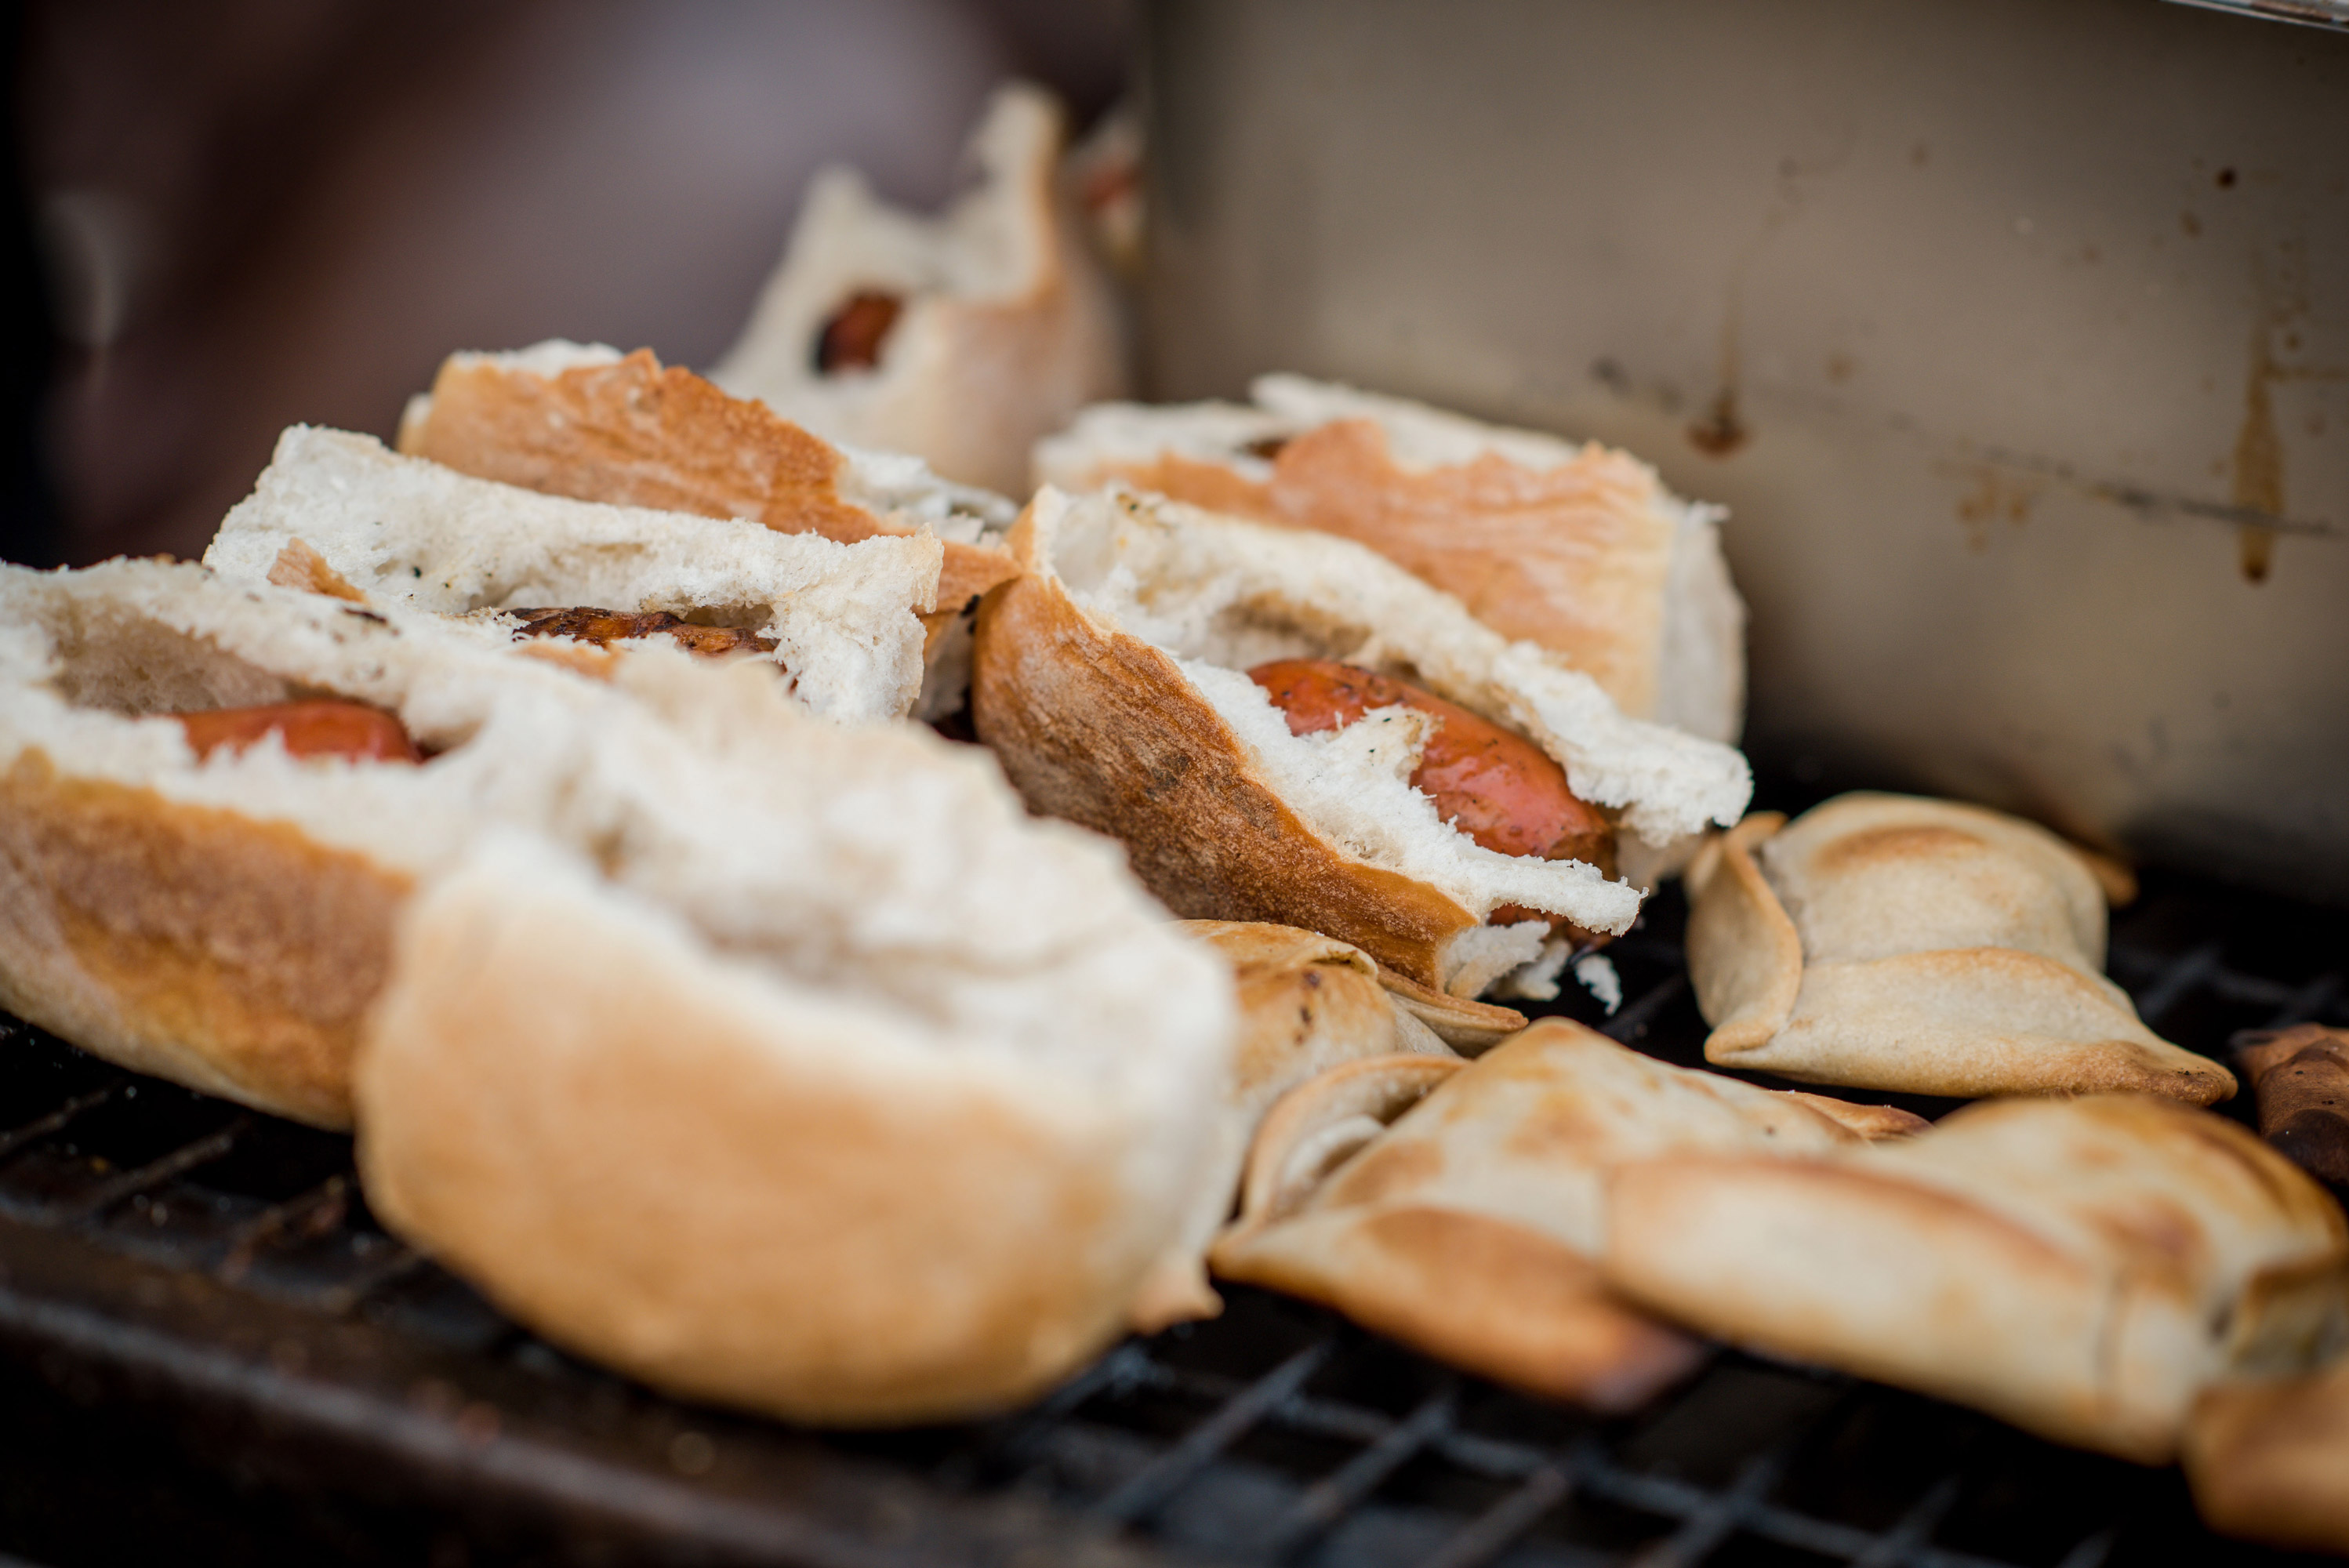 Choripan or bread and chorizo alongside some empanadas on the grill for a barbecue at the winery.